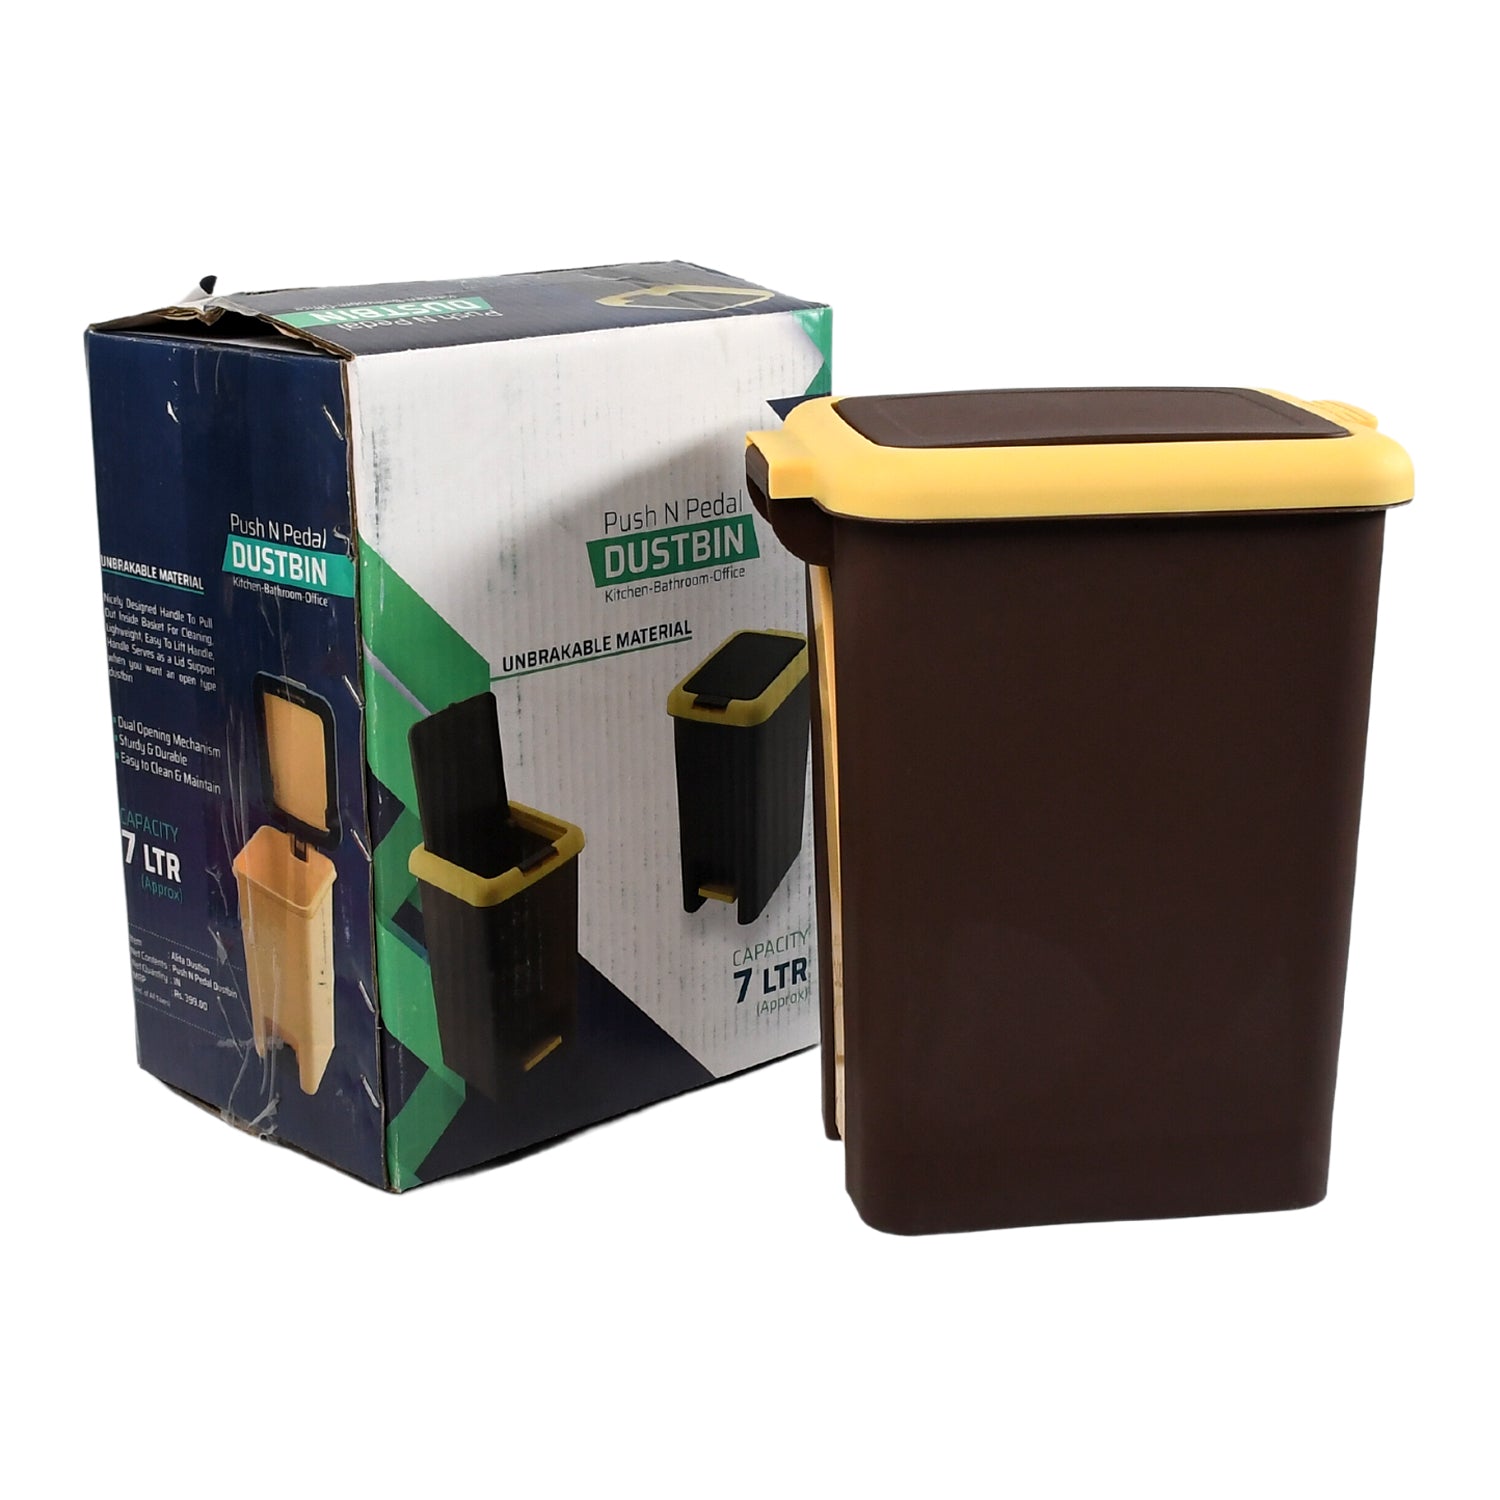 1668 Plastic Push N Pedal Dustbin Plastic Kitchen Waste Bin with Lid | Trash Can Waste Basket for Bathroom, Hands Free with Step On Foot Pedal and Garbage Bag Ring ( 7 Ltr. ) DeoDap